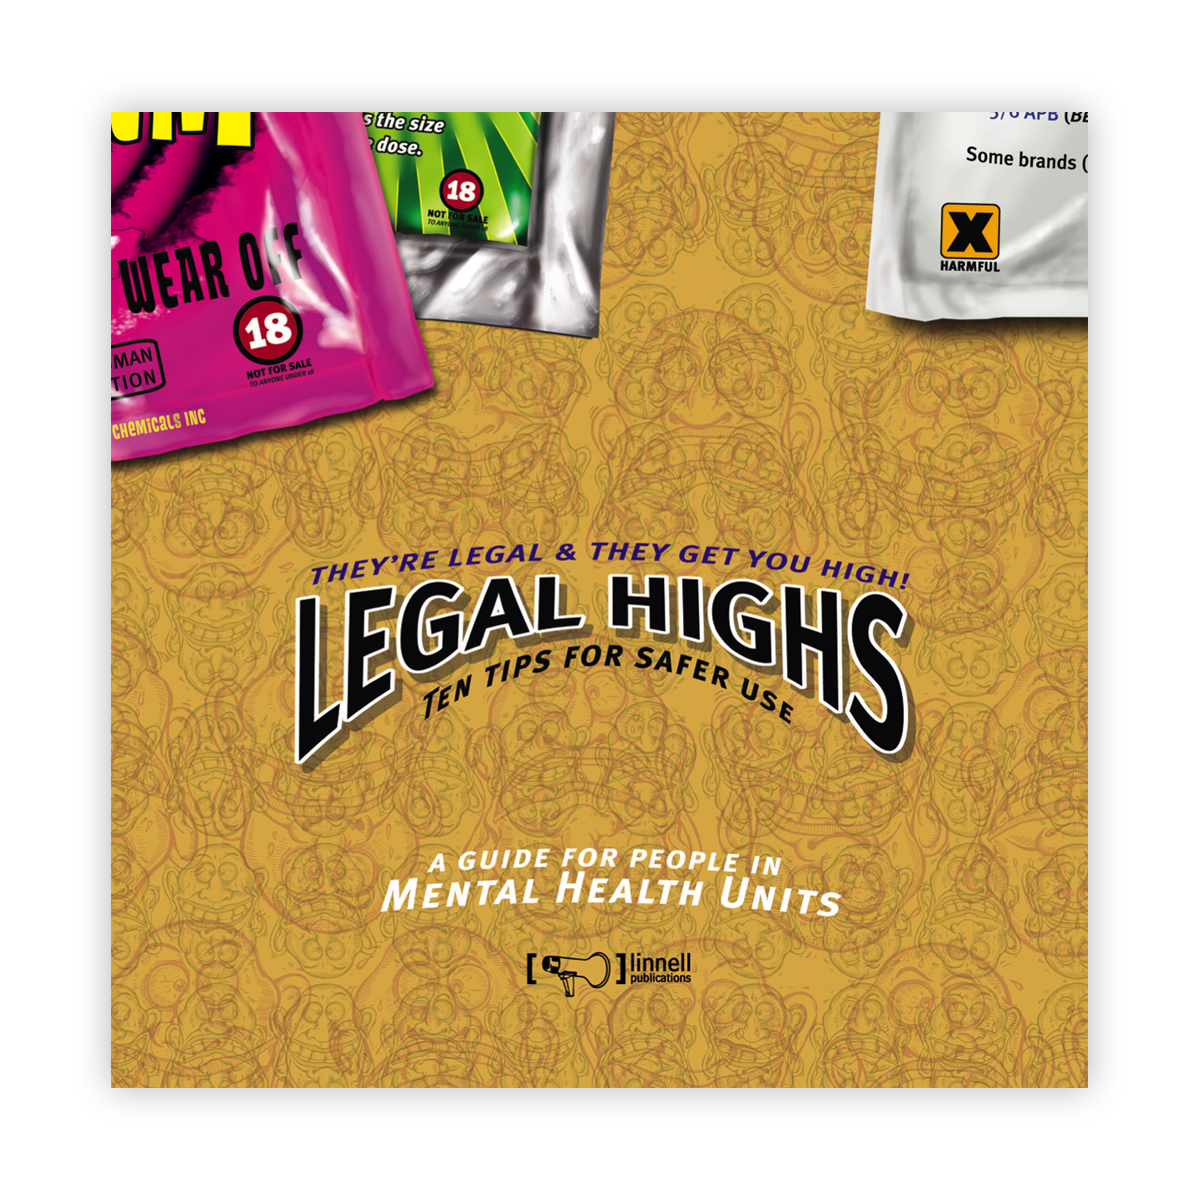 Legal Highs: a guide for people in mental health units